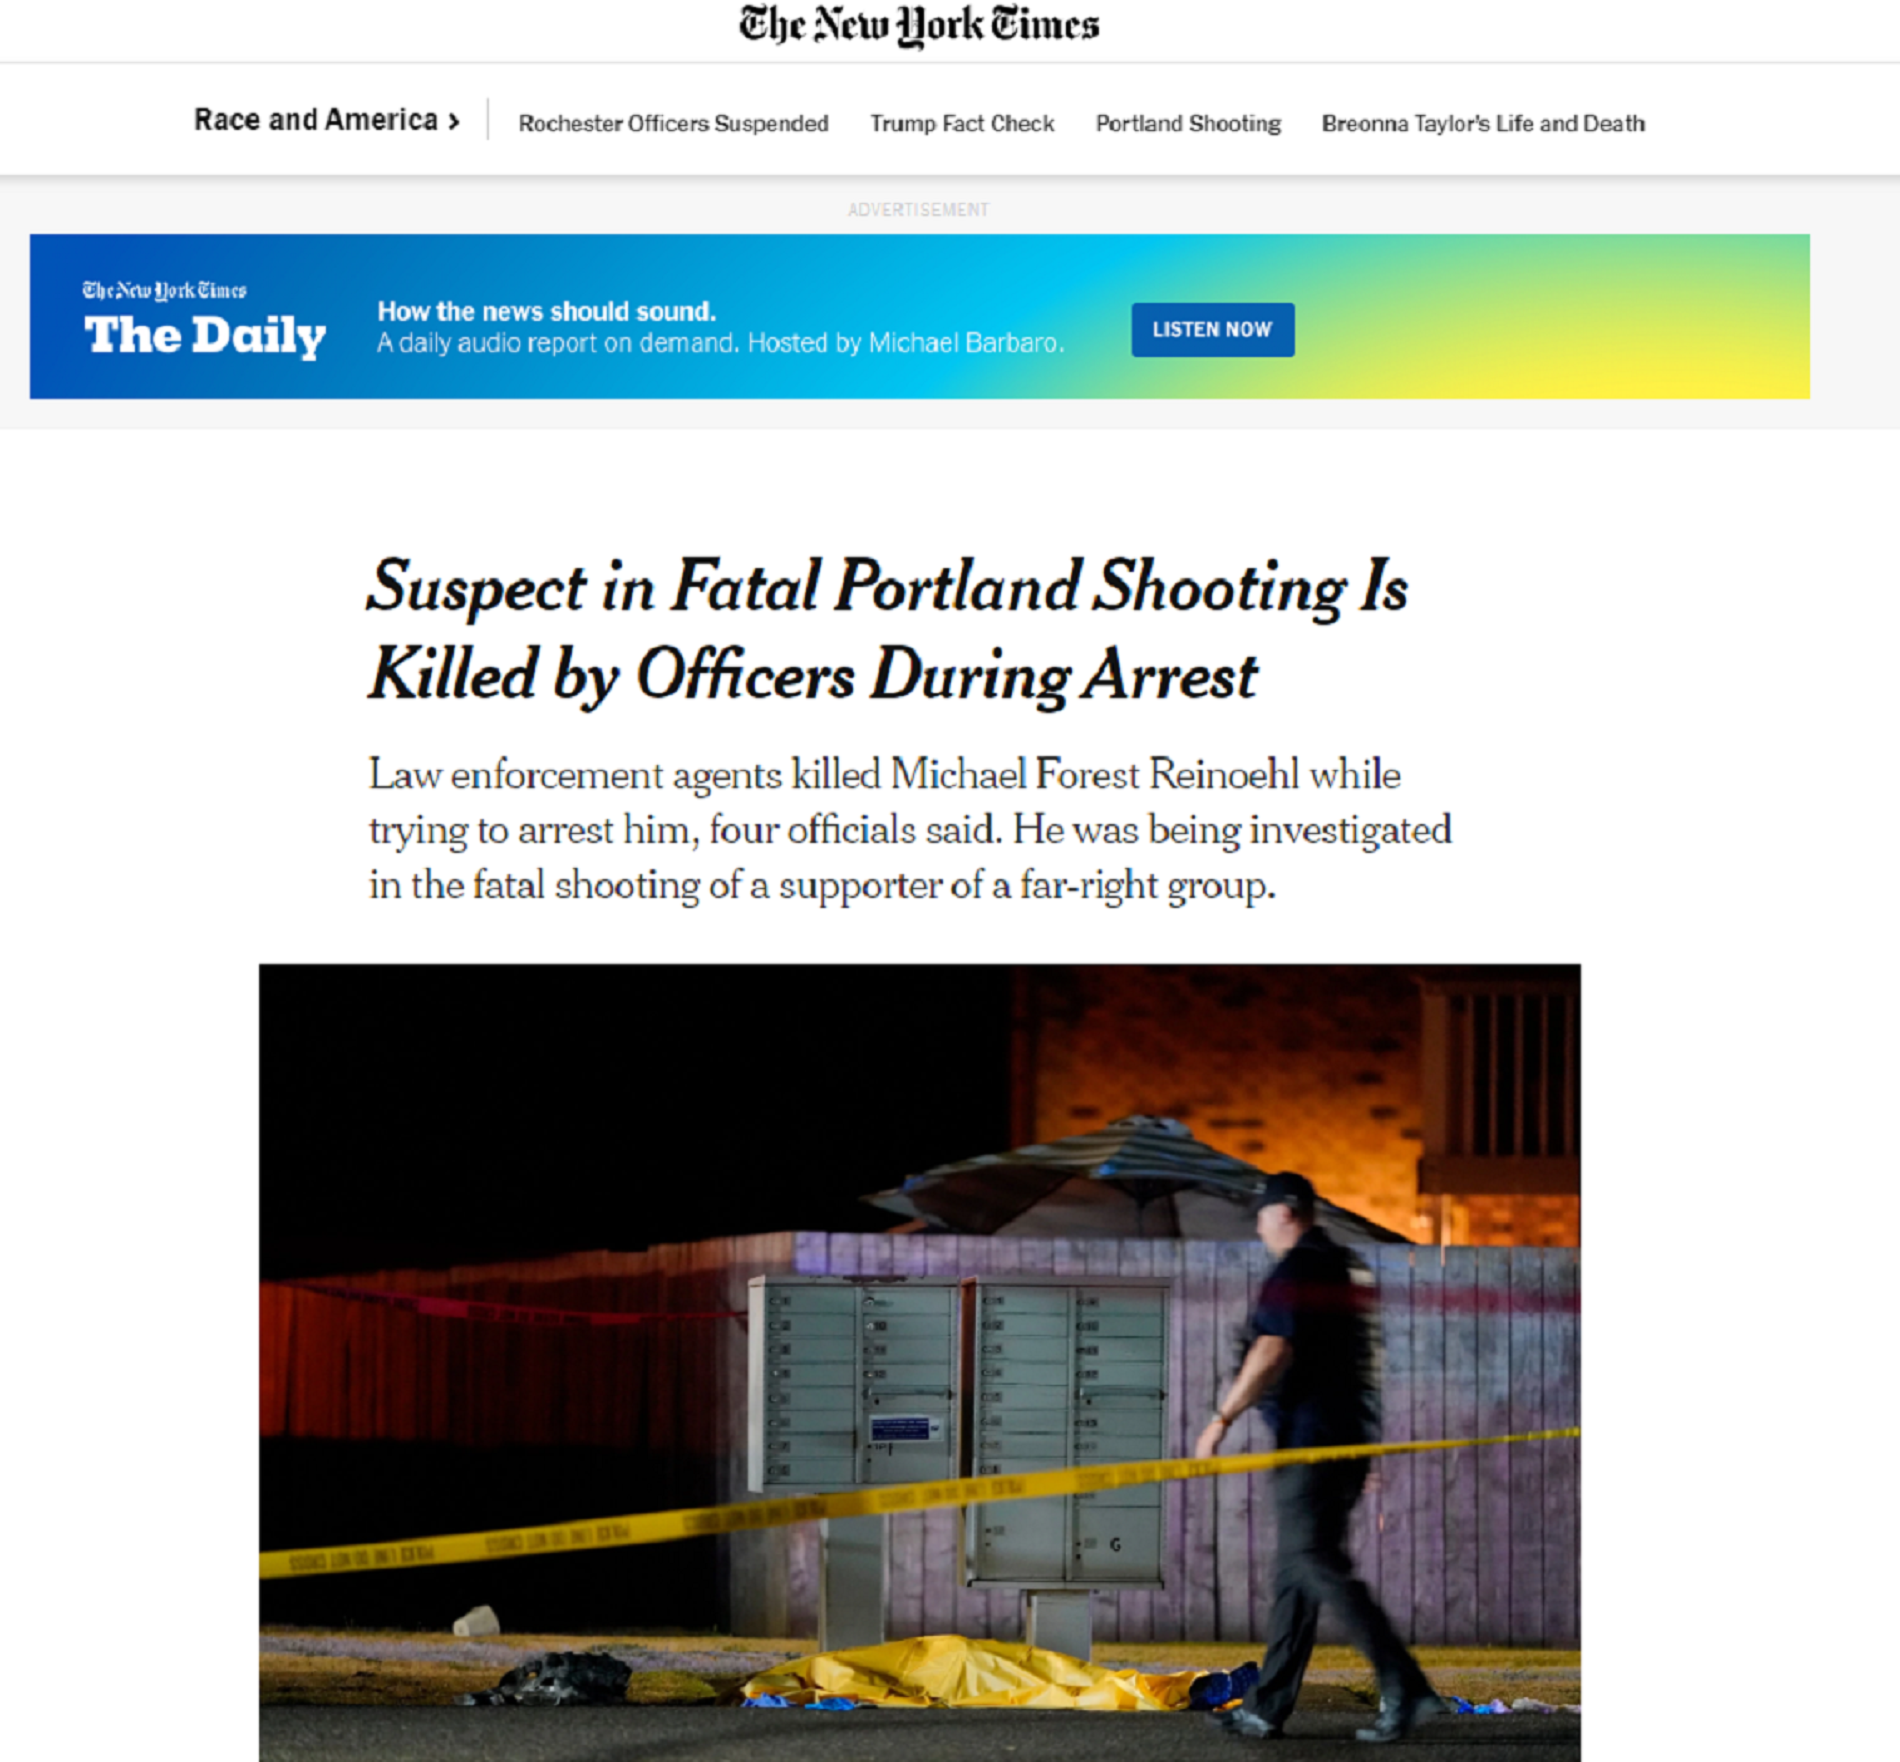 NYTImes